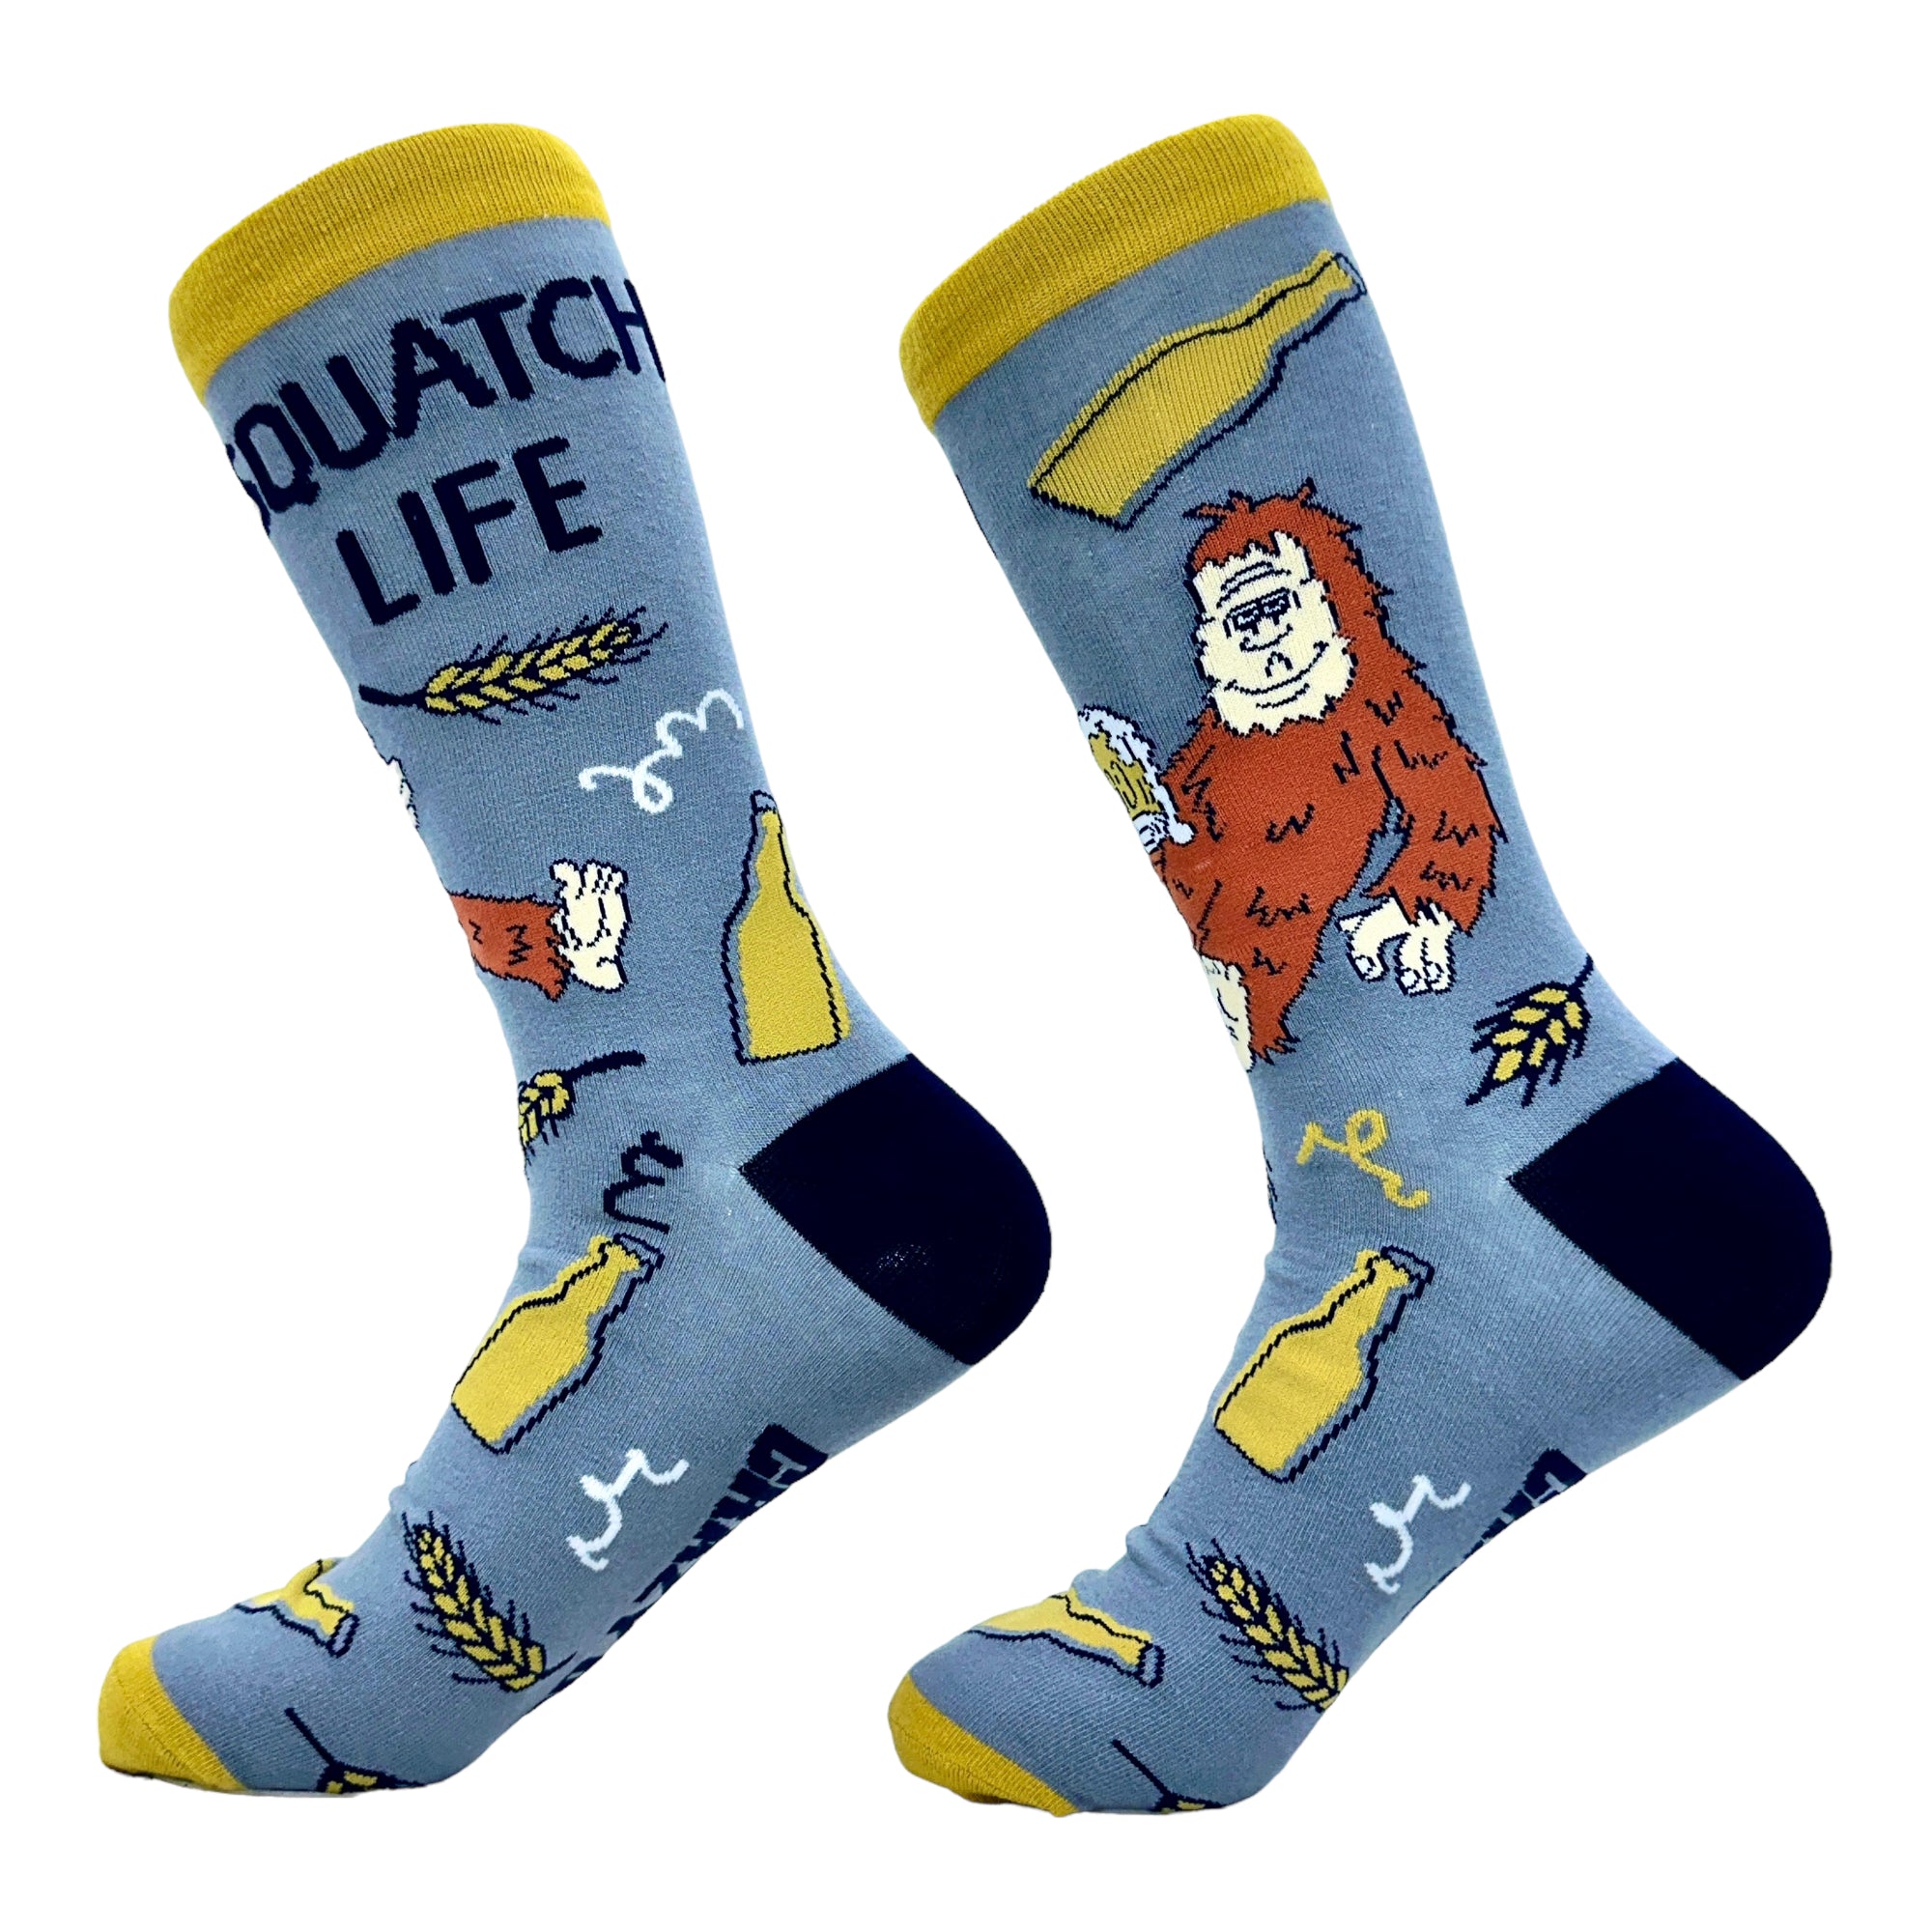 Funny Multi - Squatch Life Men's Squatch Life Sock Nerdy Beer Drinking sarcastic Tee